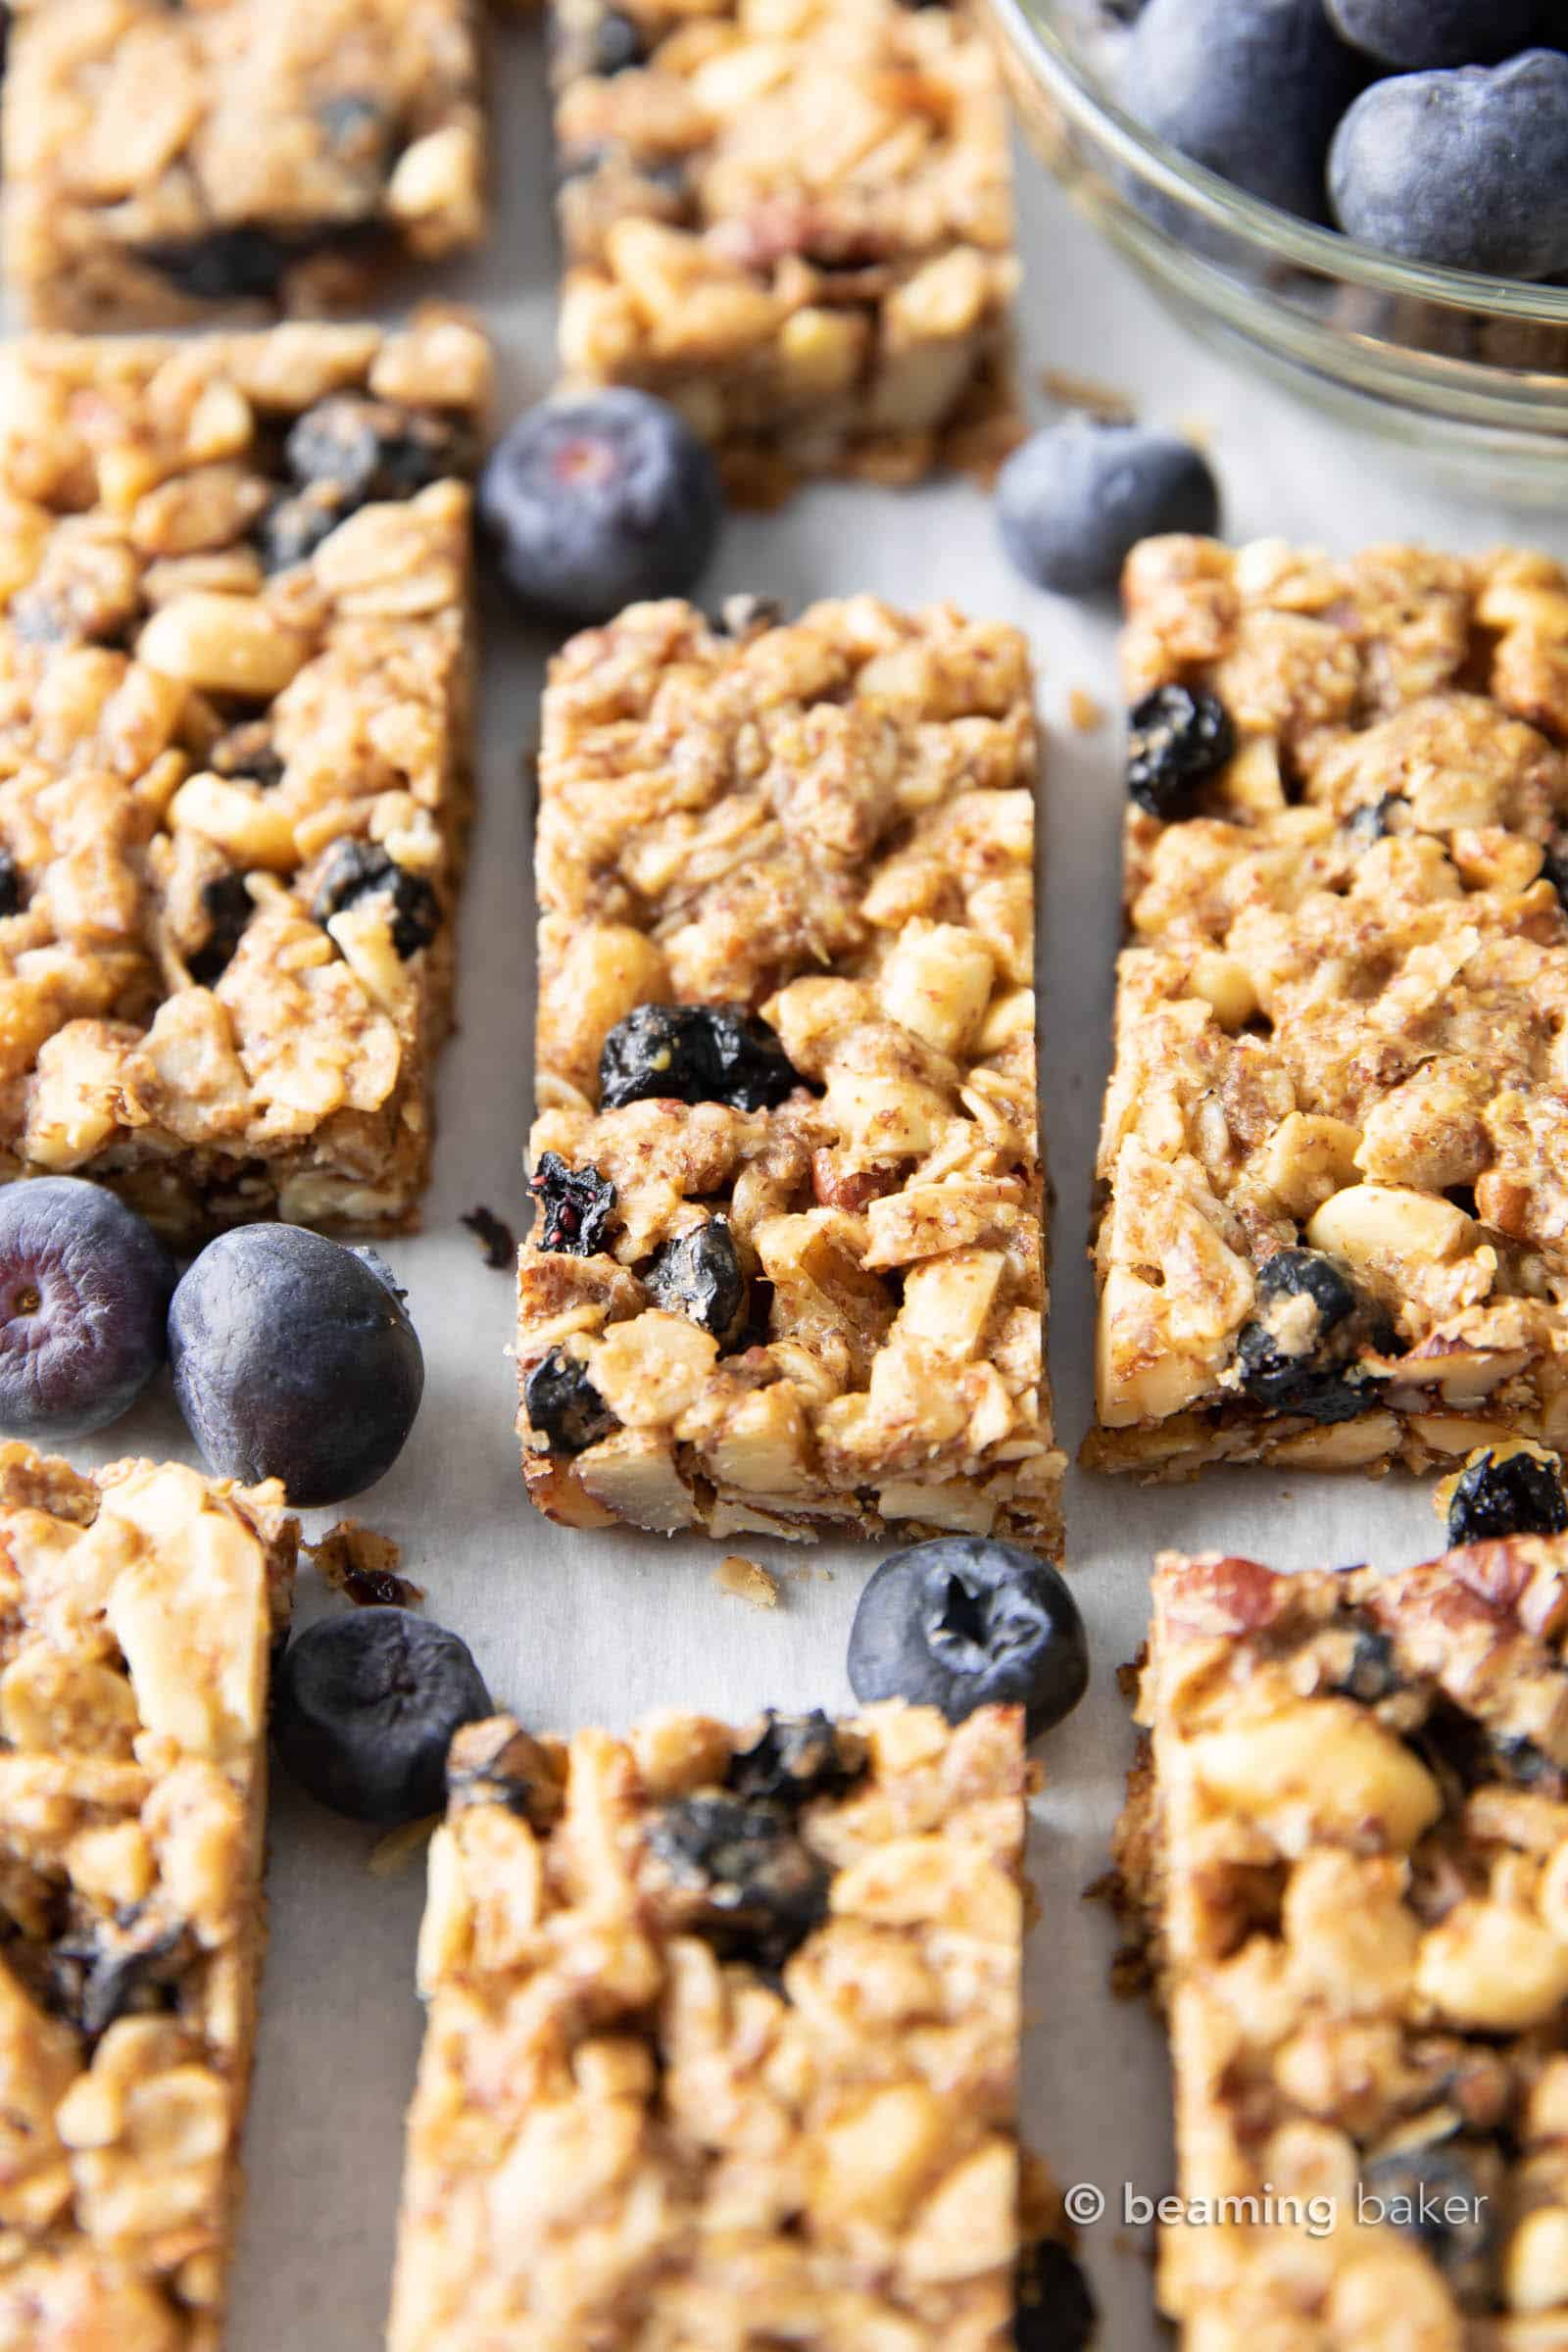 Blueberry Granola Bars (GF): this healthy homemade granola bars recipe is chewy, nutrient-rich & EASY to make! Plant-Based, Refined Sugar-Free, Vegan. #GranolaBars #Blueberry #Healthy #GlutenFree | Recipe at BeamingBaker.com